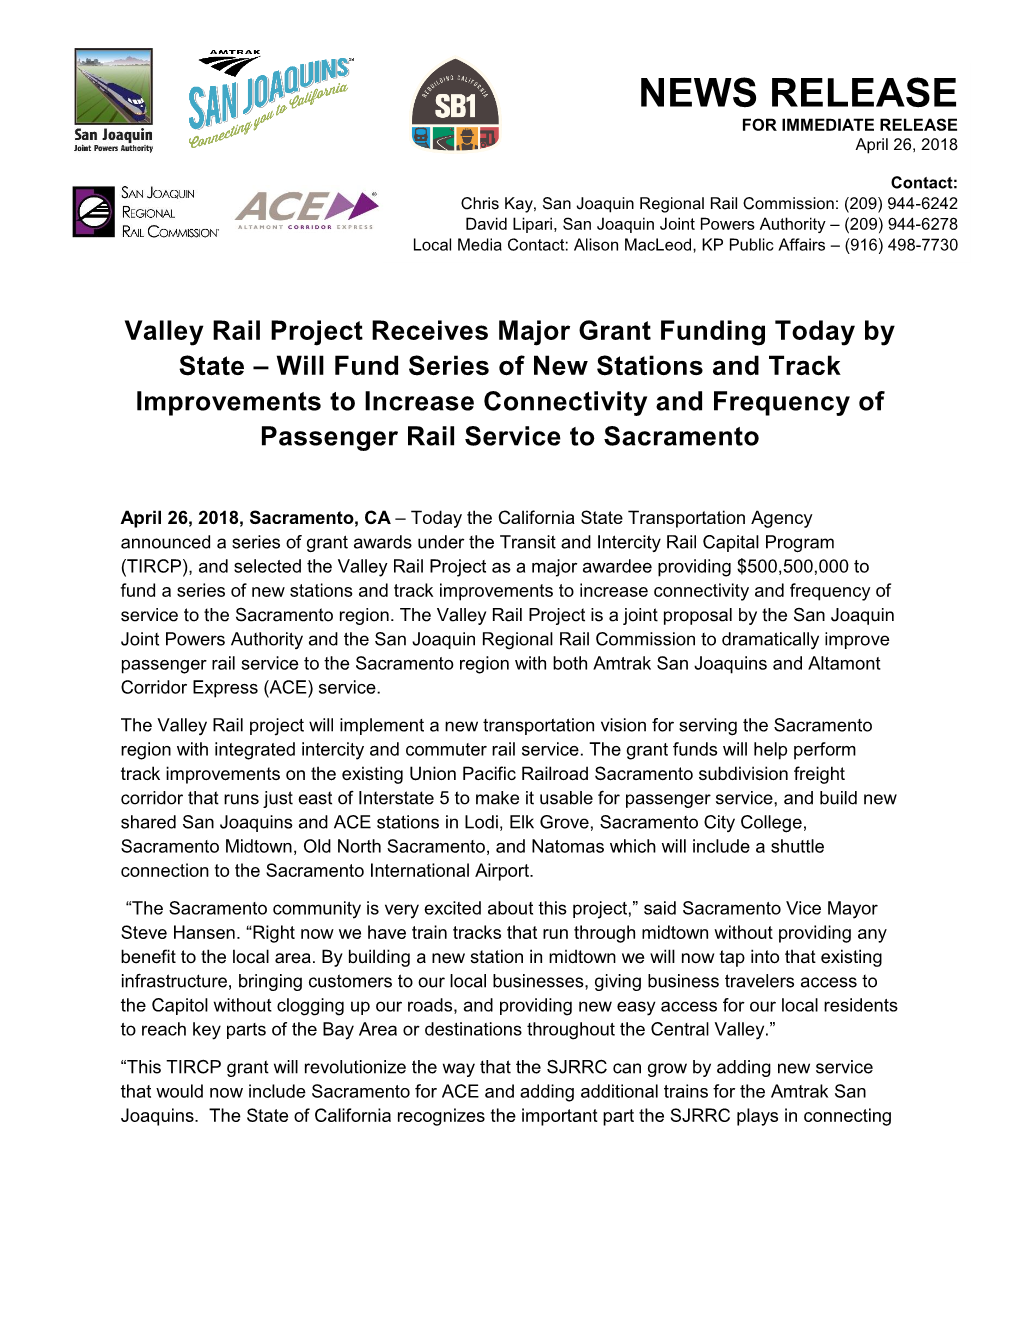 Valley Rail Project Receives Major Grant Funding